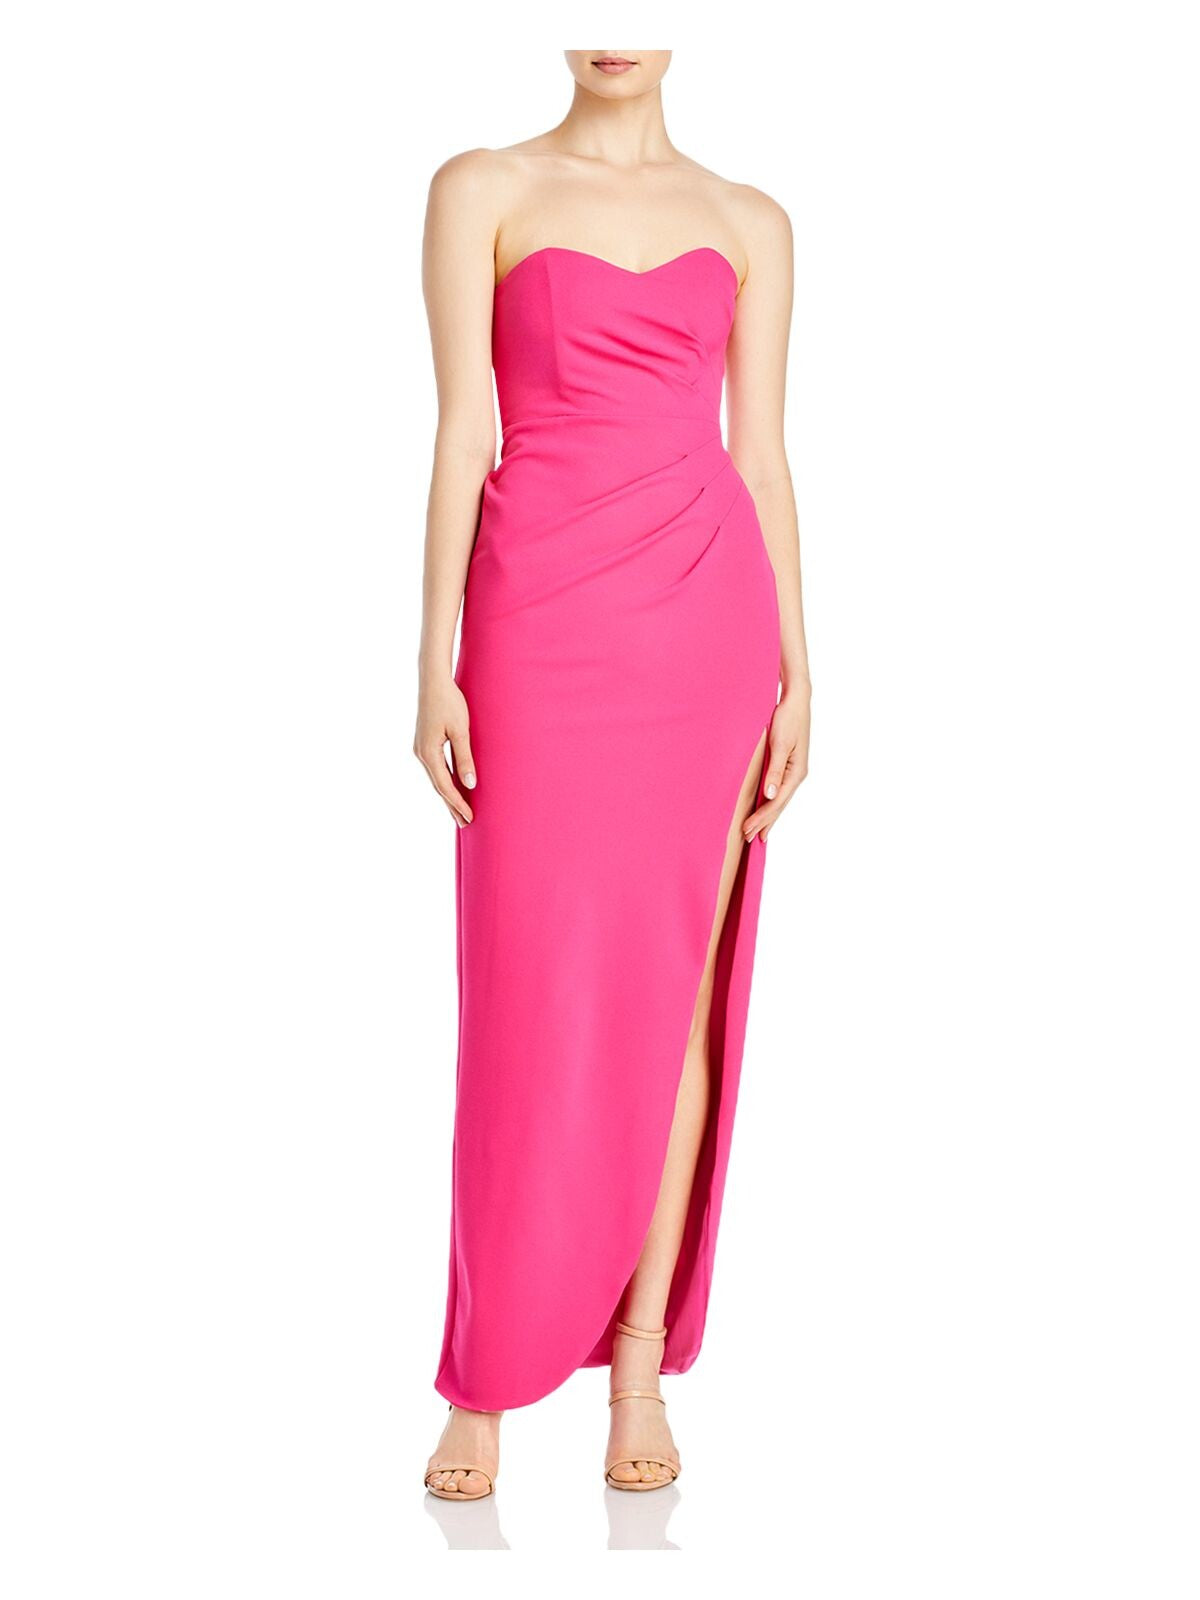 NOOKIE Womens Pink Slitted Sleeveless Sweetheart Neckline Maxi Party Sheath Dress L